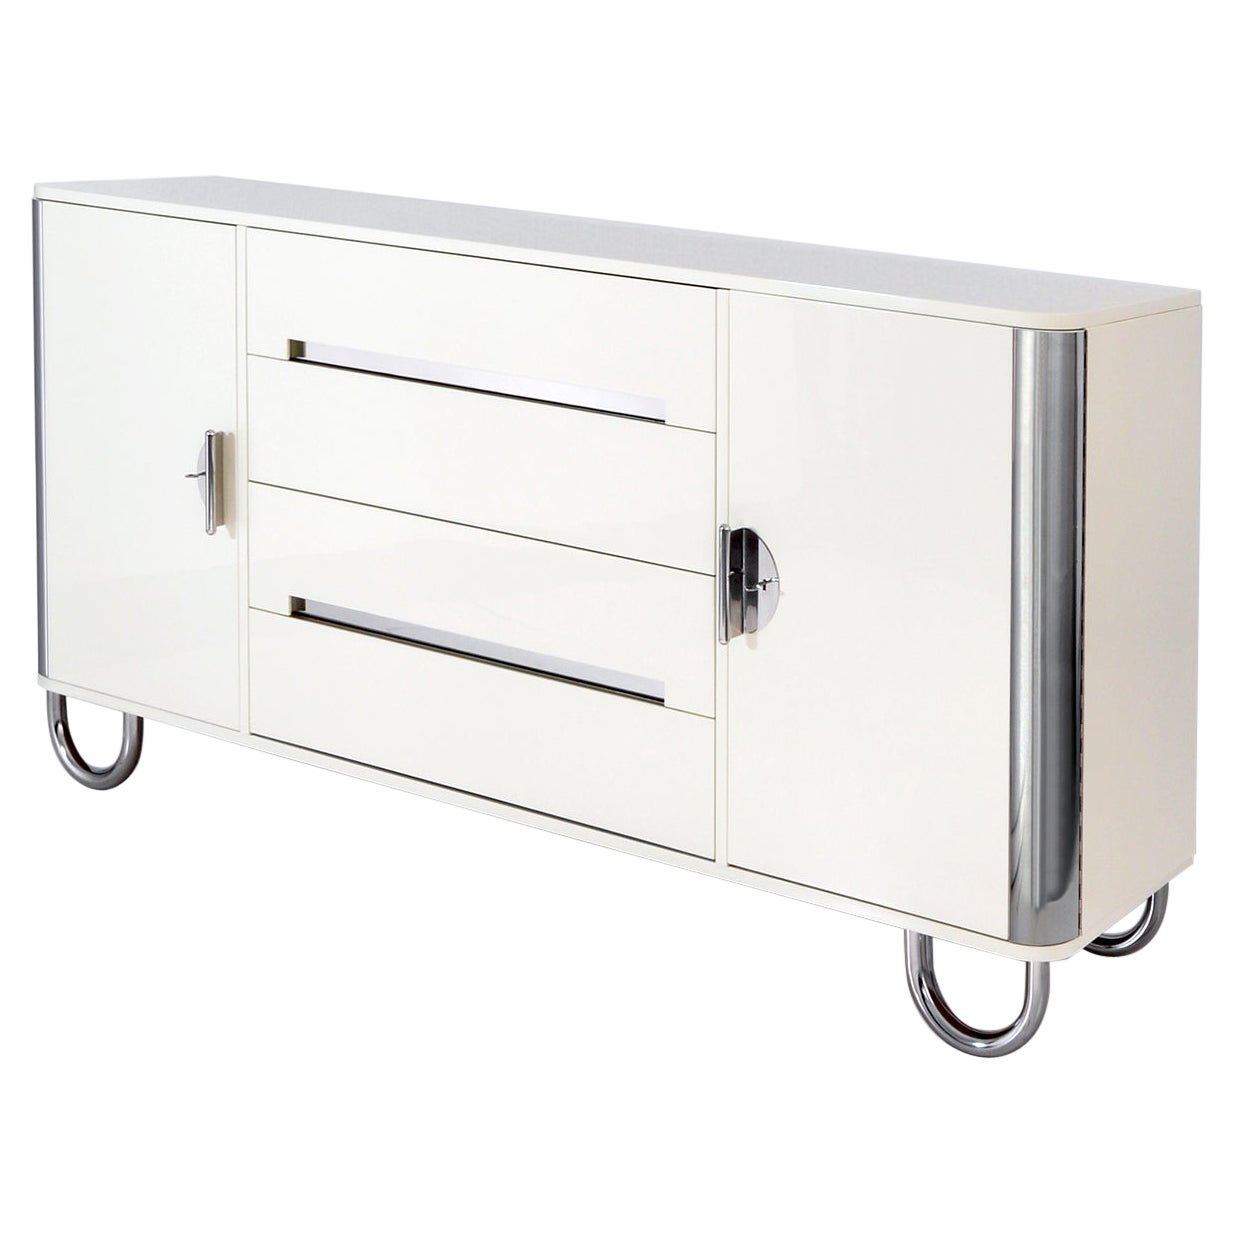 Bespoke Modernist Sideboard with Doors and Drawers, High-Gloss Lacquered Wood